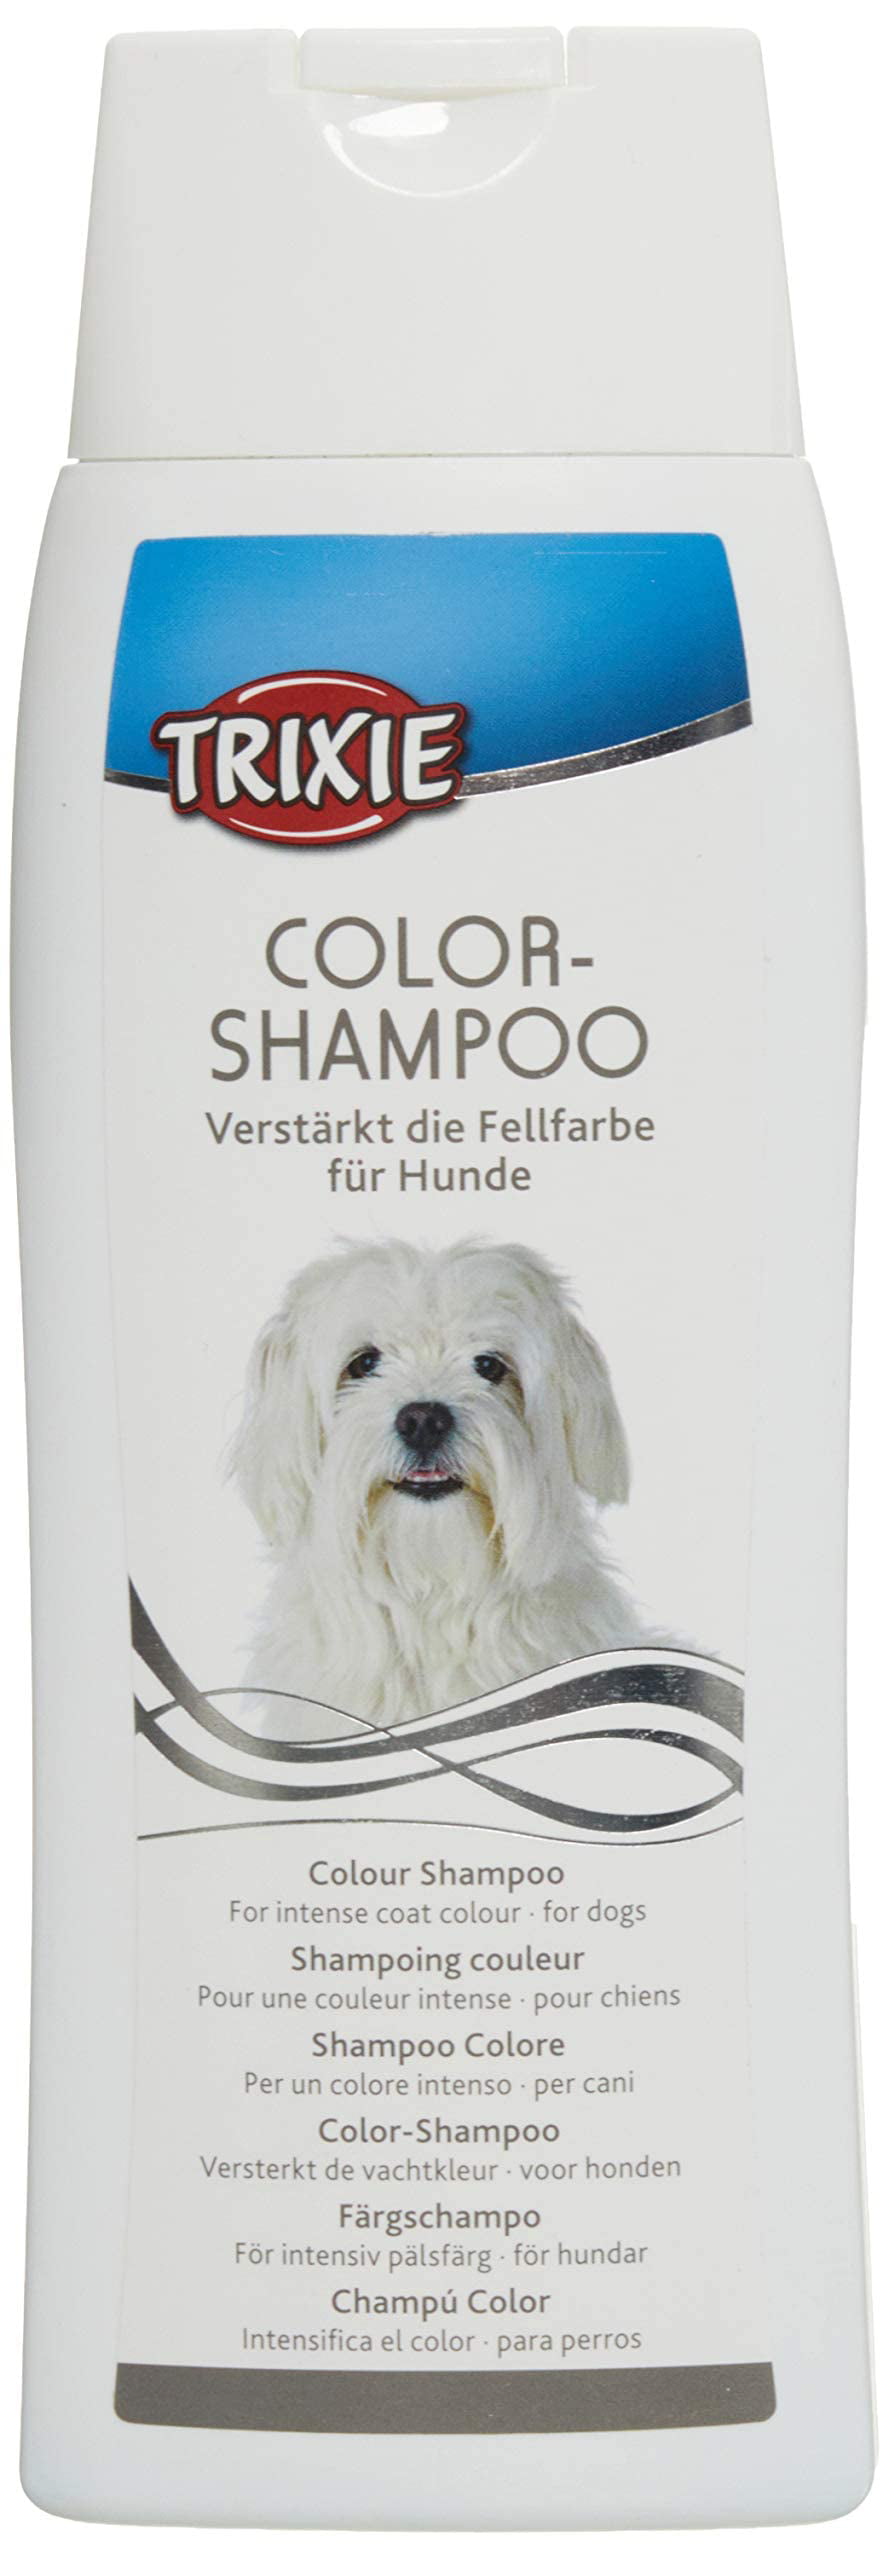 Trixie: - Colour Shampoo | Dog Shampoo for Intense Coat Dogs, Strengthens The Colour of The Dog's White or Light-Coloured Coat | Helps in Removing Smells and Odours - 250ml - Walmart.com